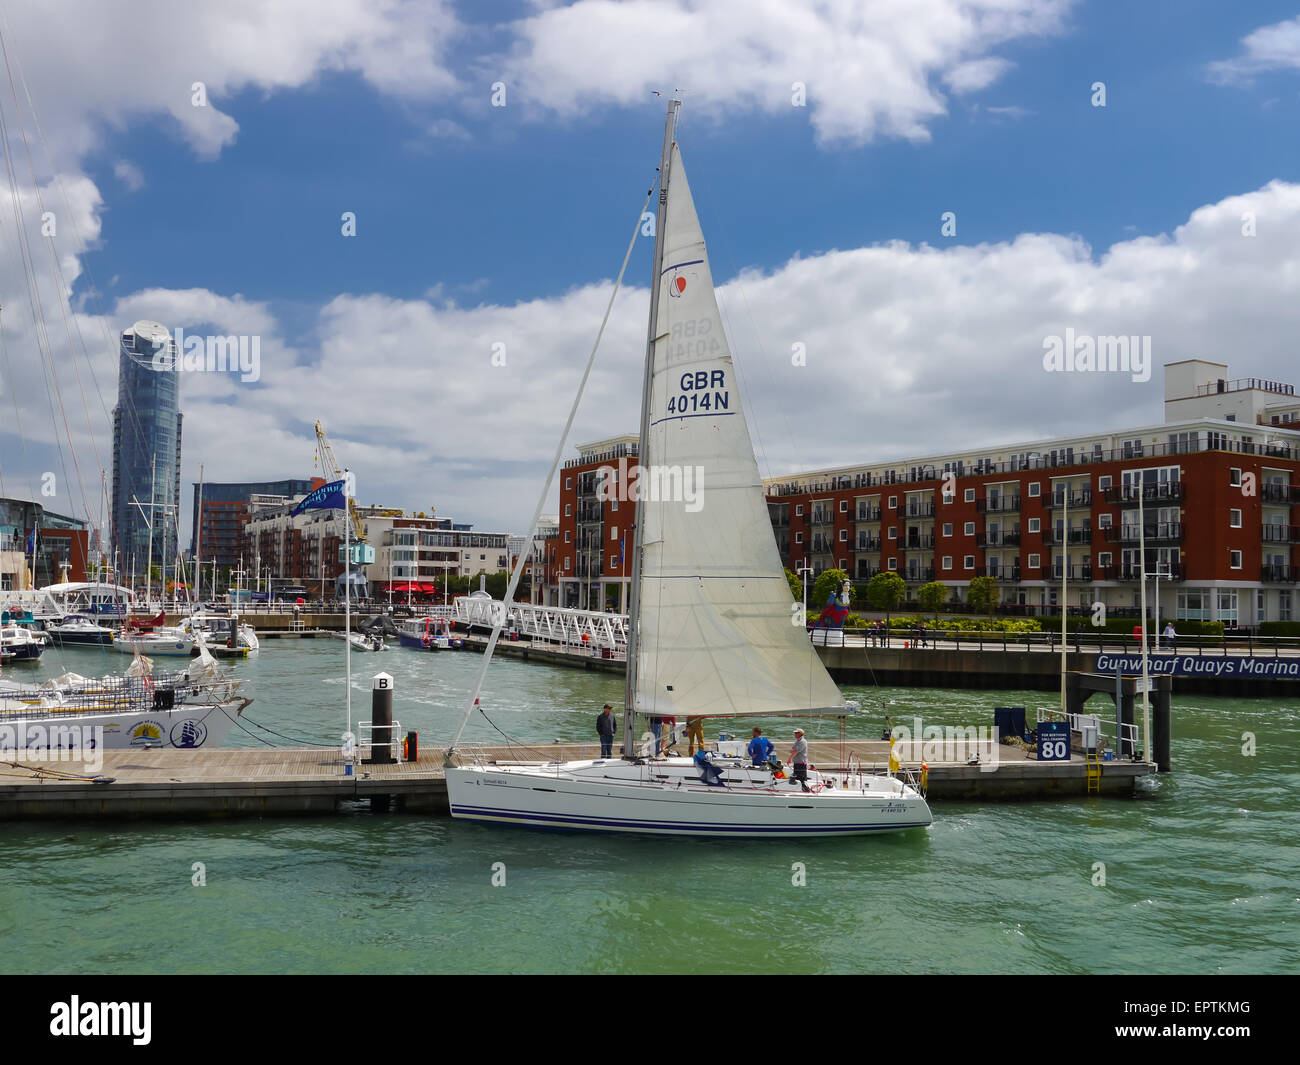 A yacht berthed at Gunwharf Quays, Portsmouth, England Stock Photo